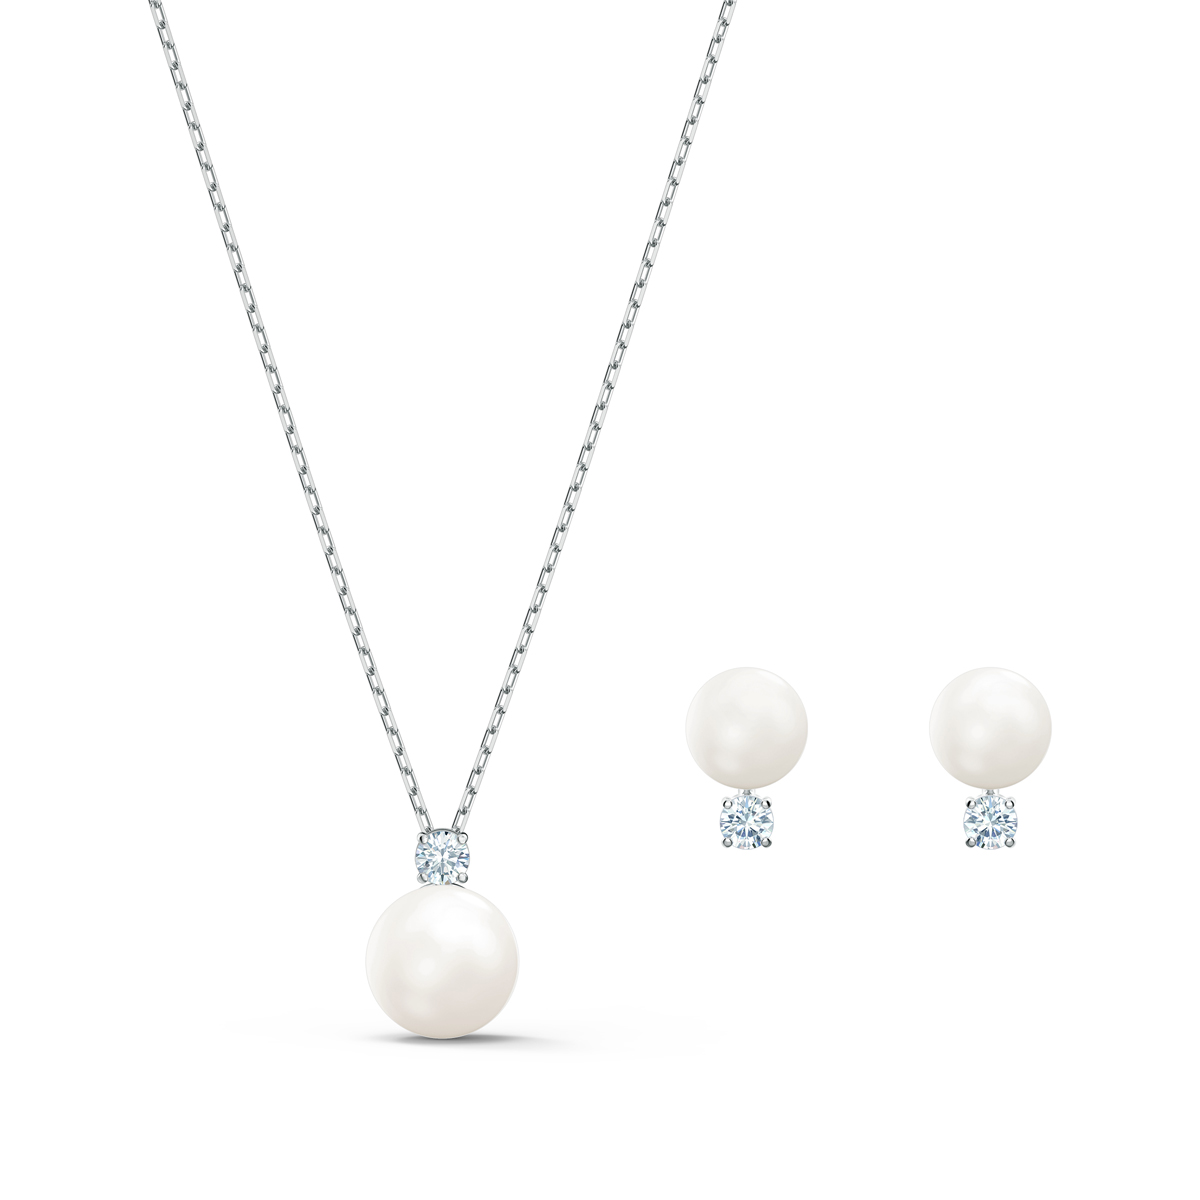 Swarovski Treasure Pearl Necklace and Earrings Set, White, Rhodium Plated